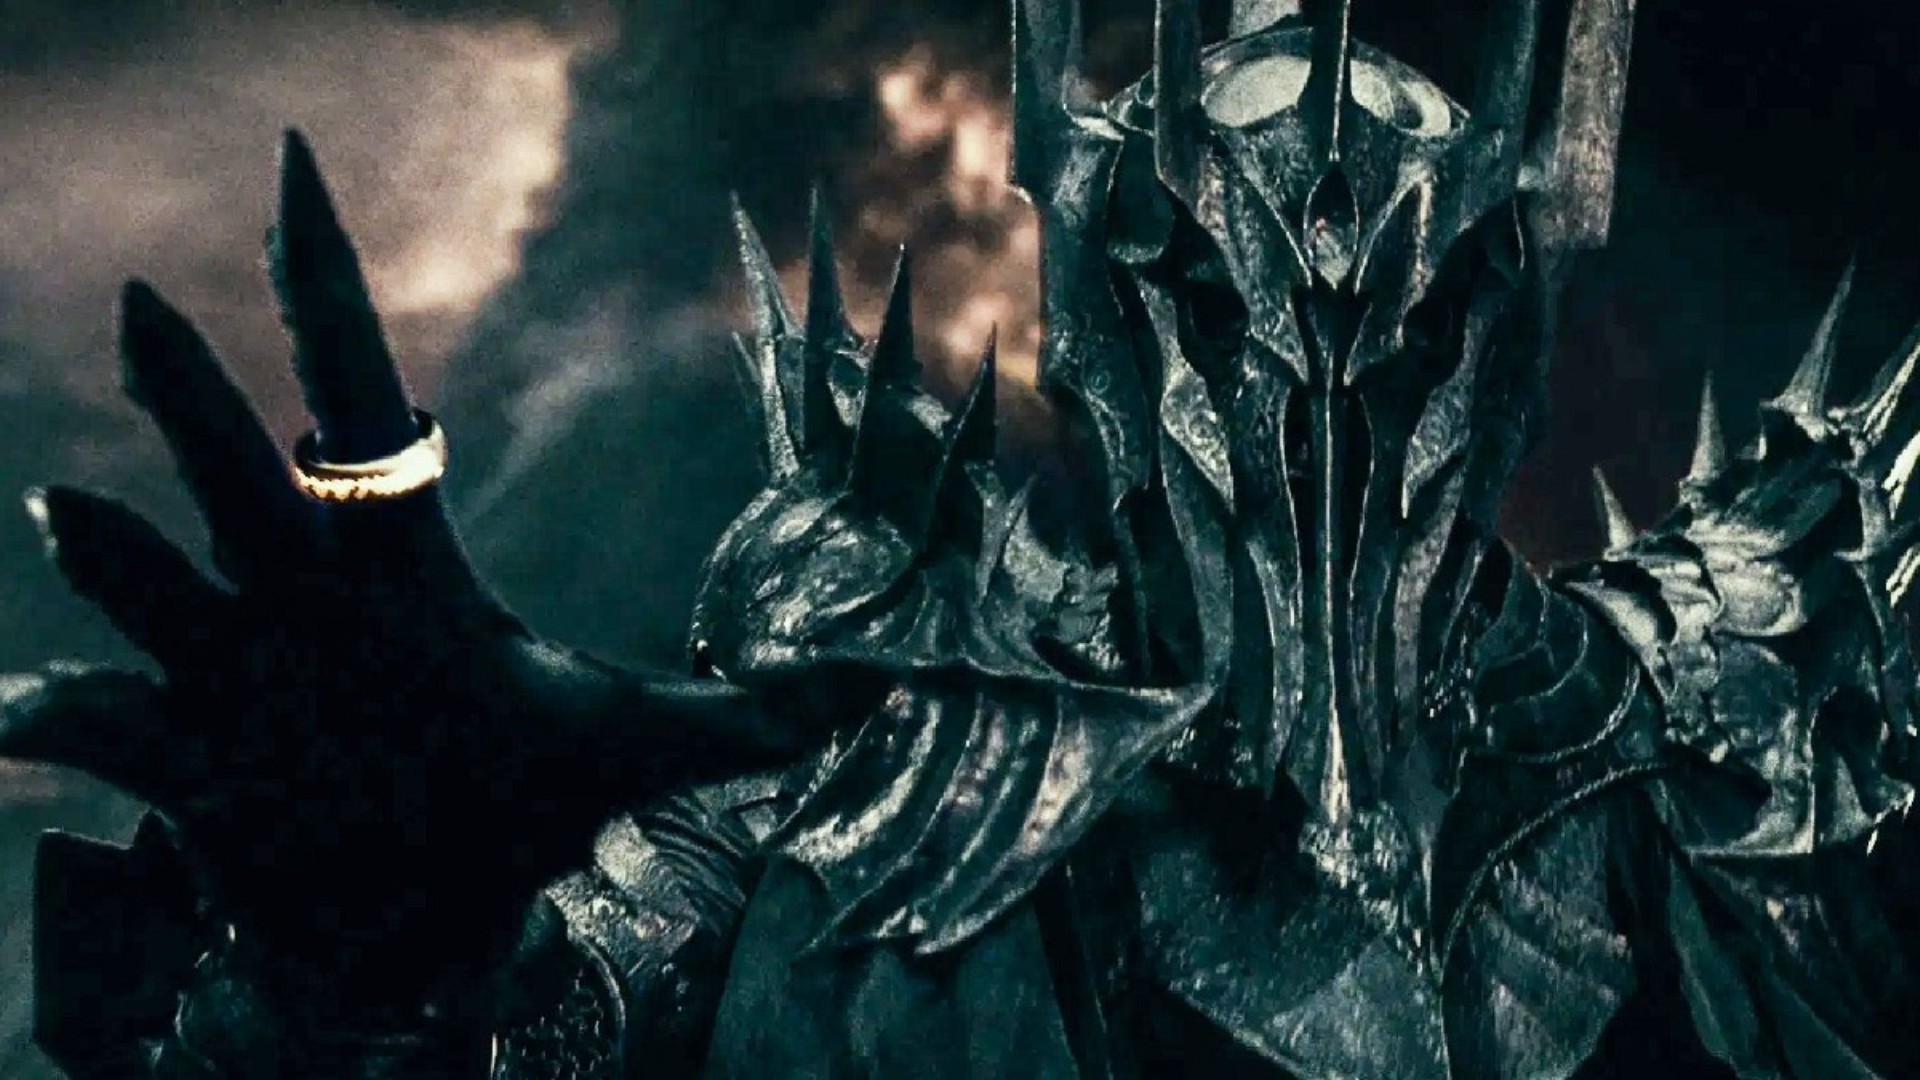 Sauron's Use of the Ring